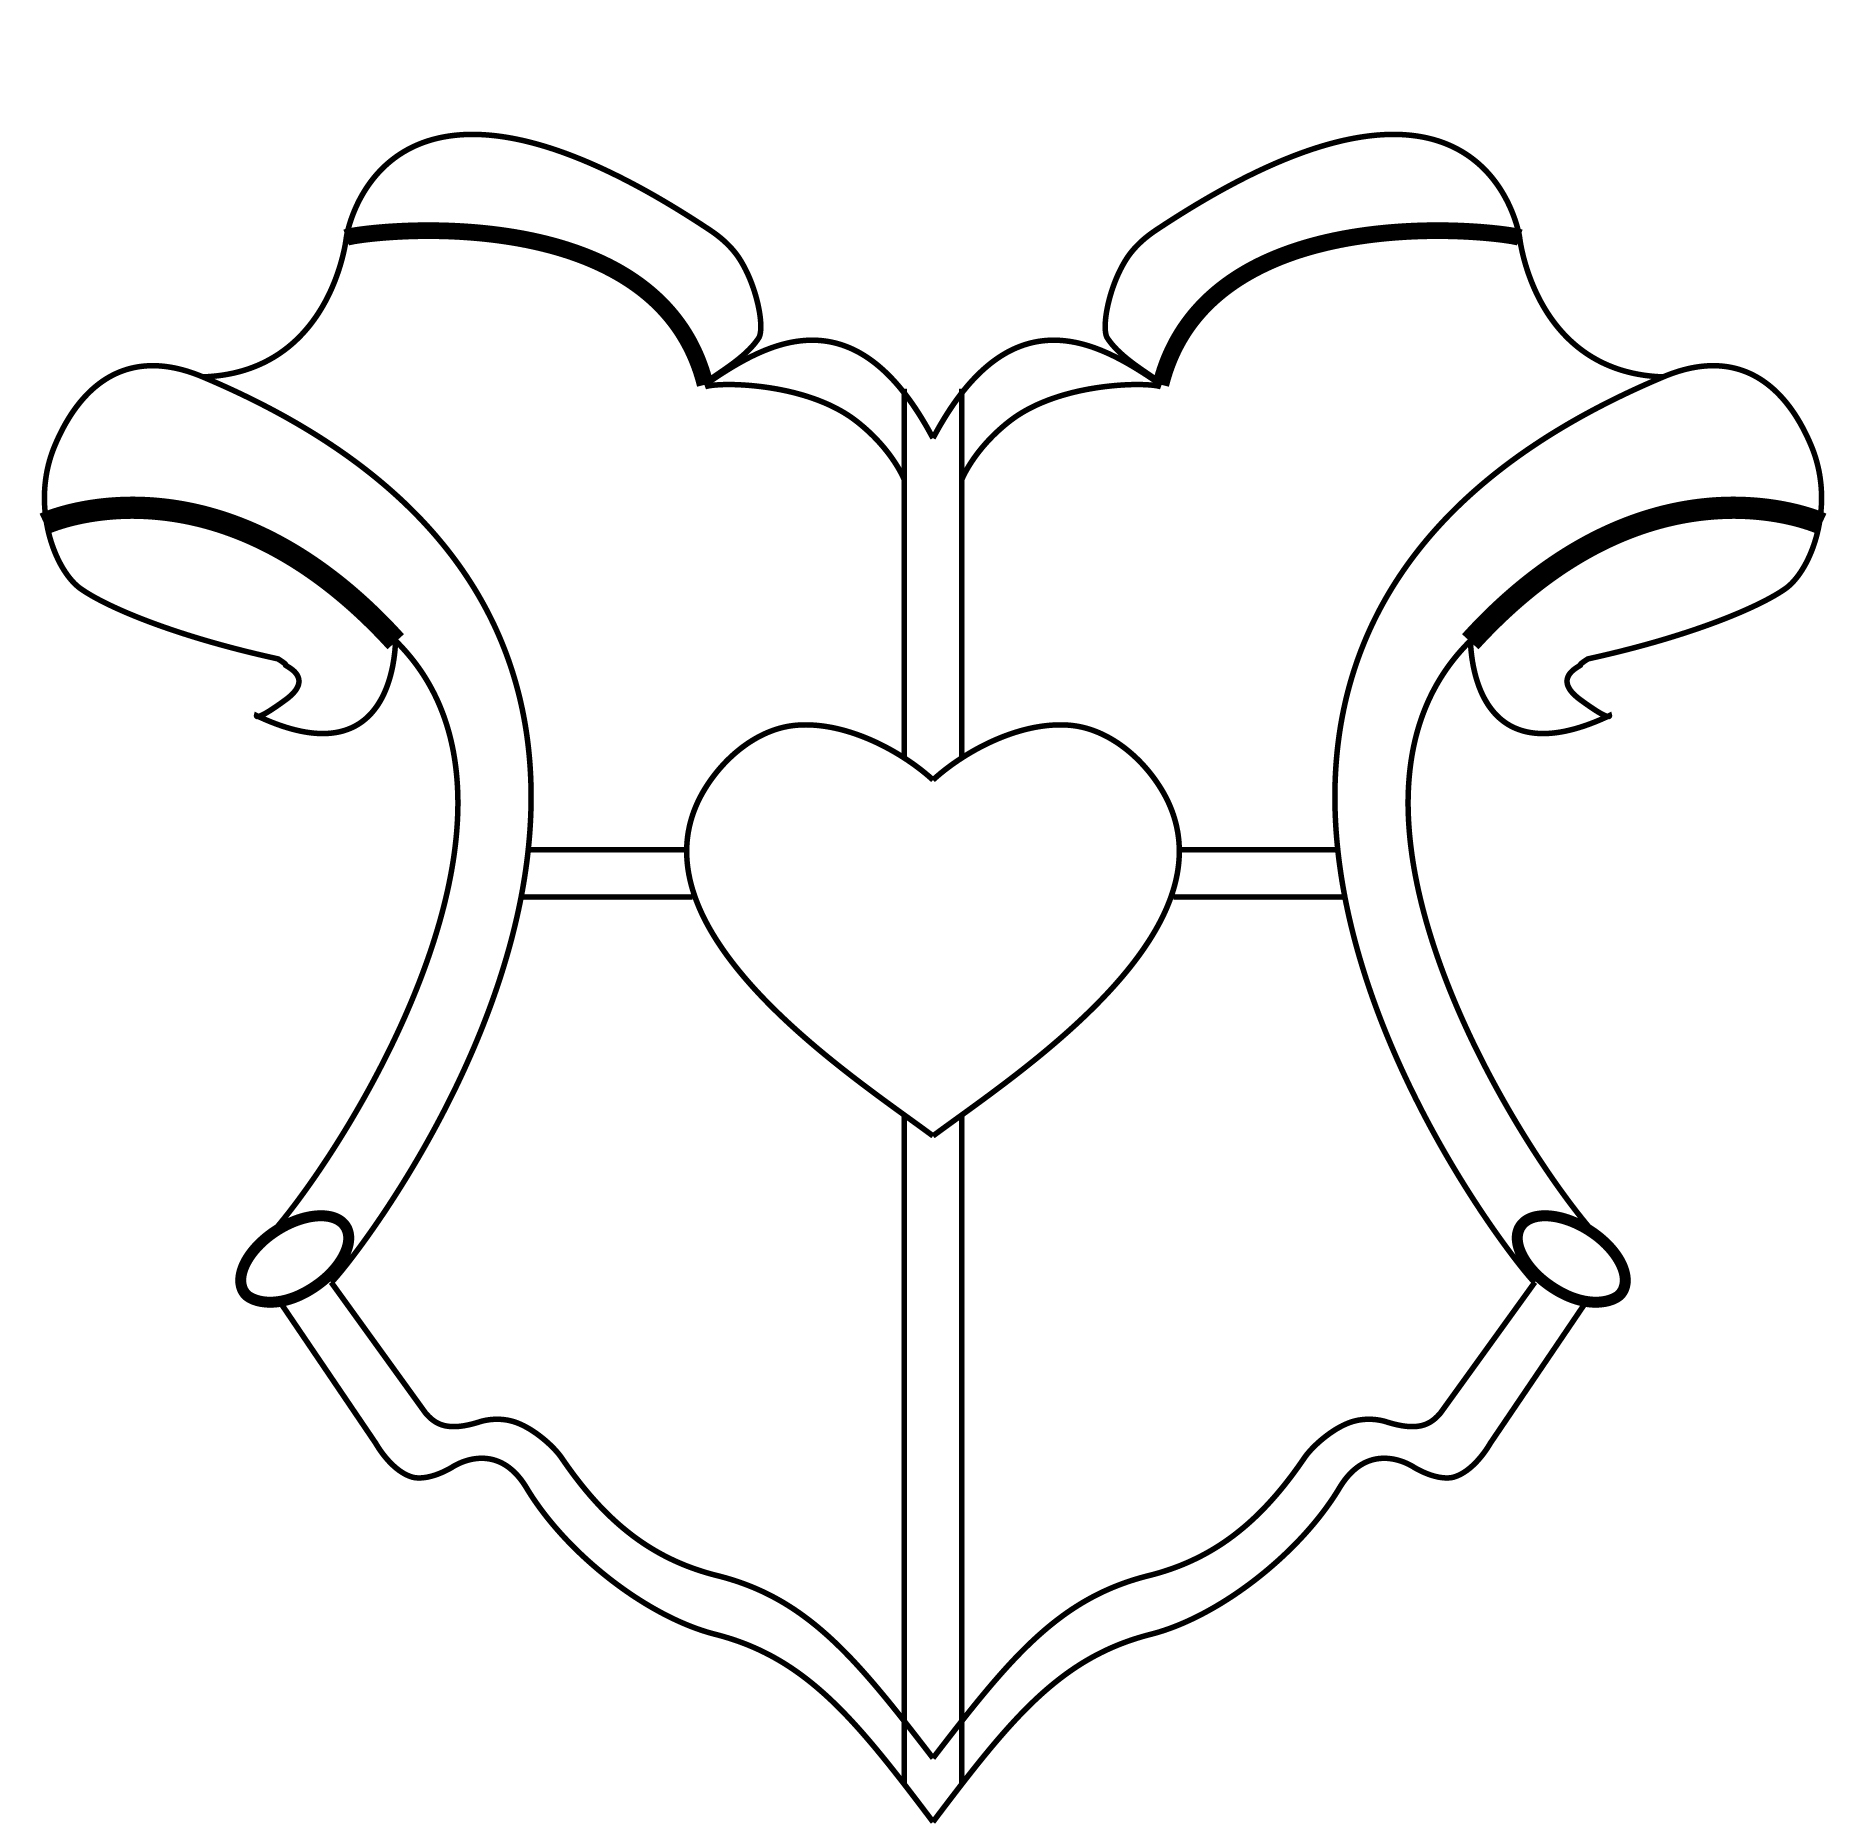 Coat Of Arms Template Free